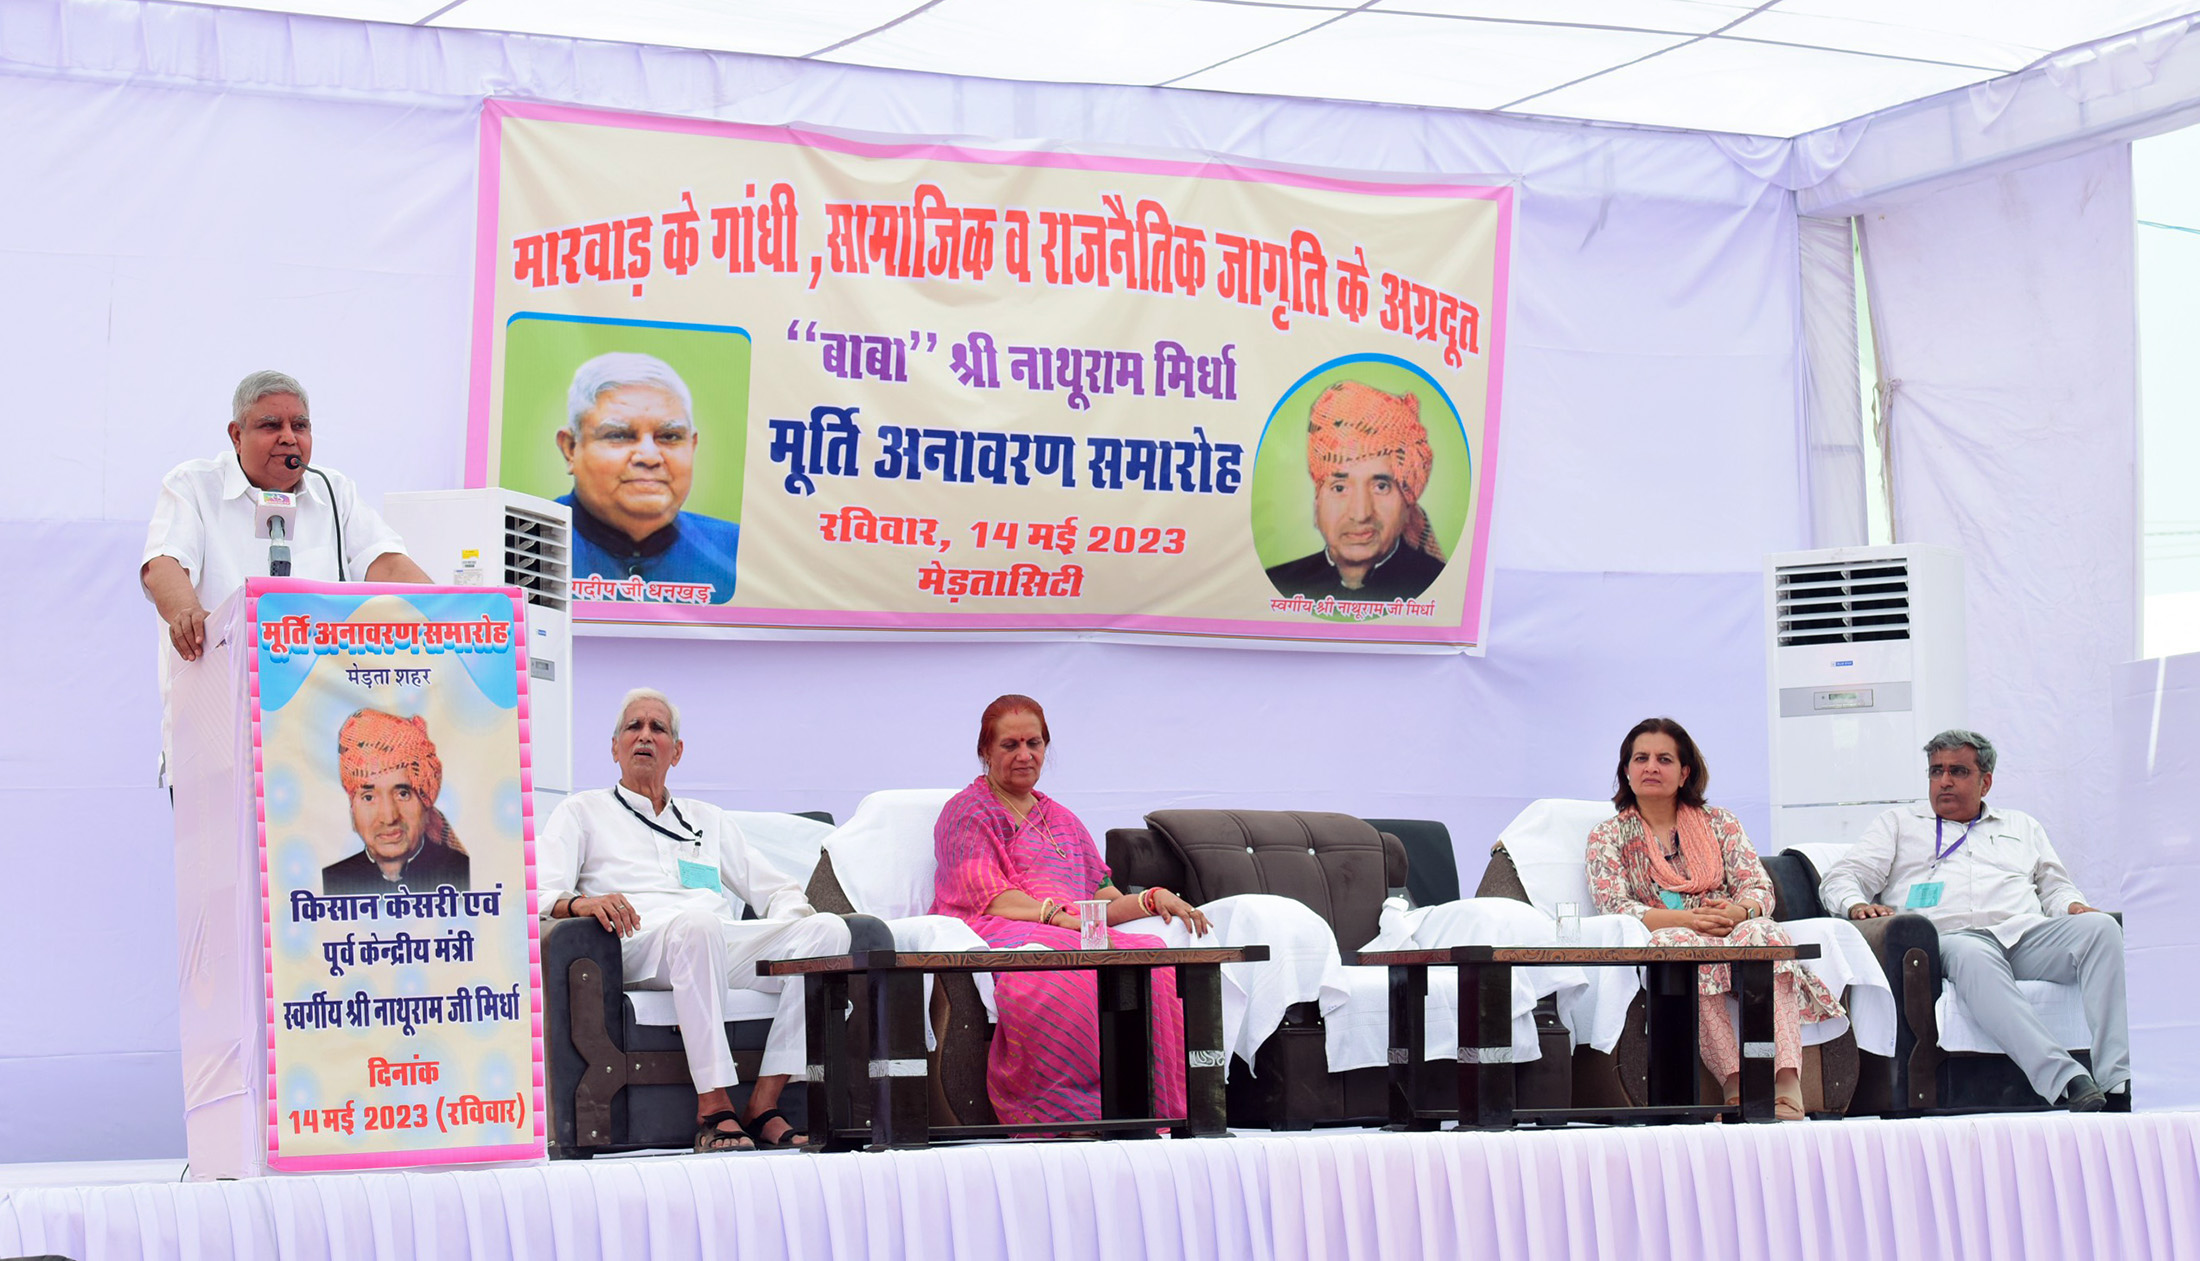 The Vice President, Shri Jagdeep Dhankhar addressing the gathering after unveiling the statue of late Shri Nathuram Mirdha at Merta City, Nagaur in Rajasthan on May 14, 2023.